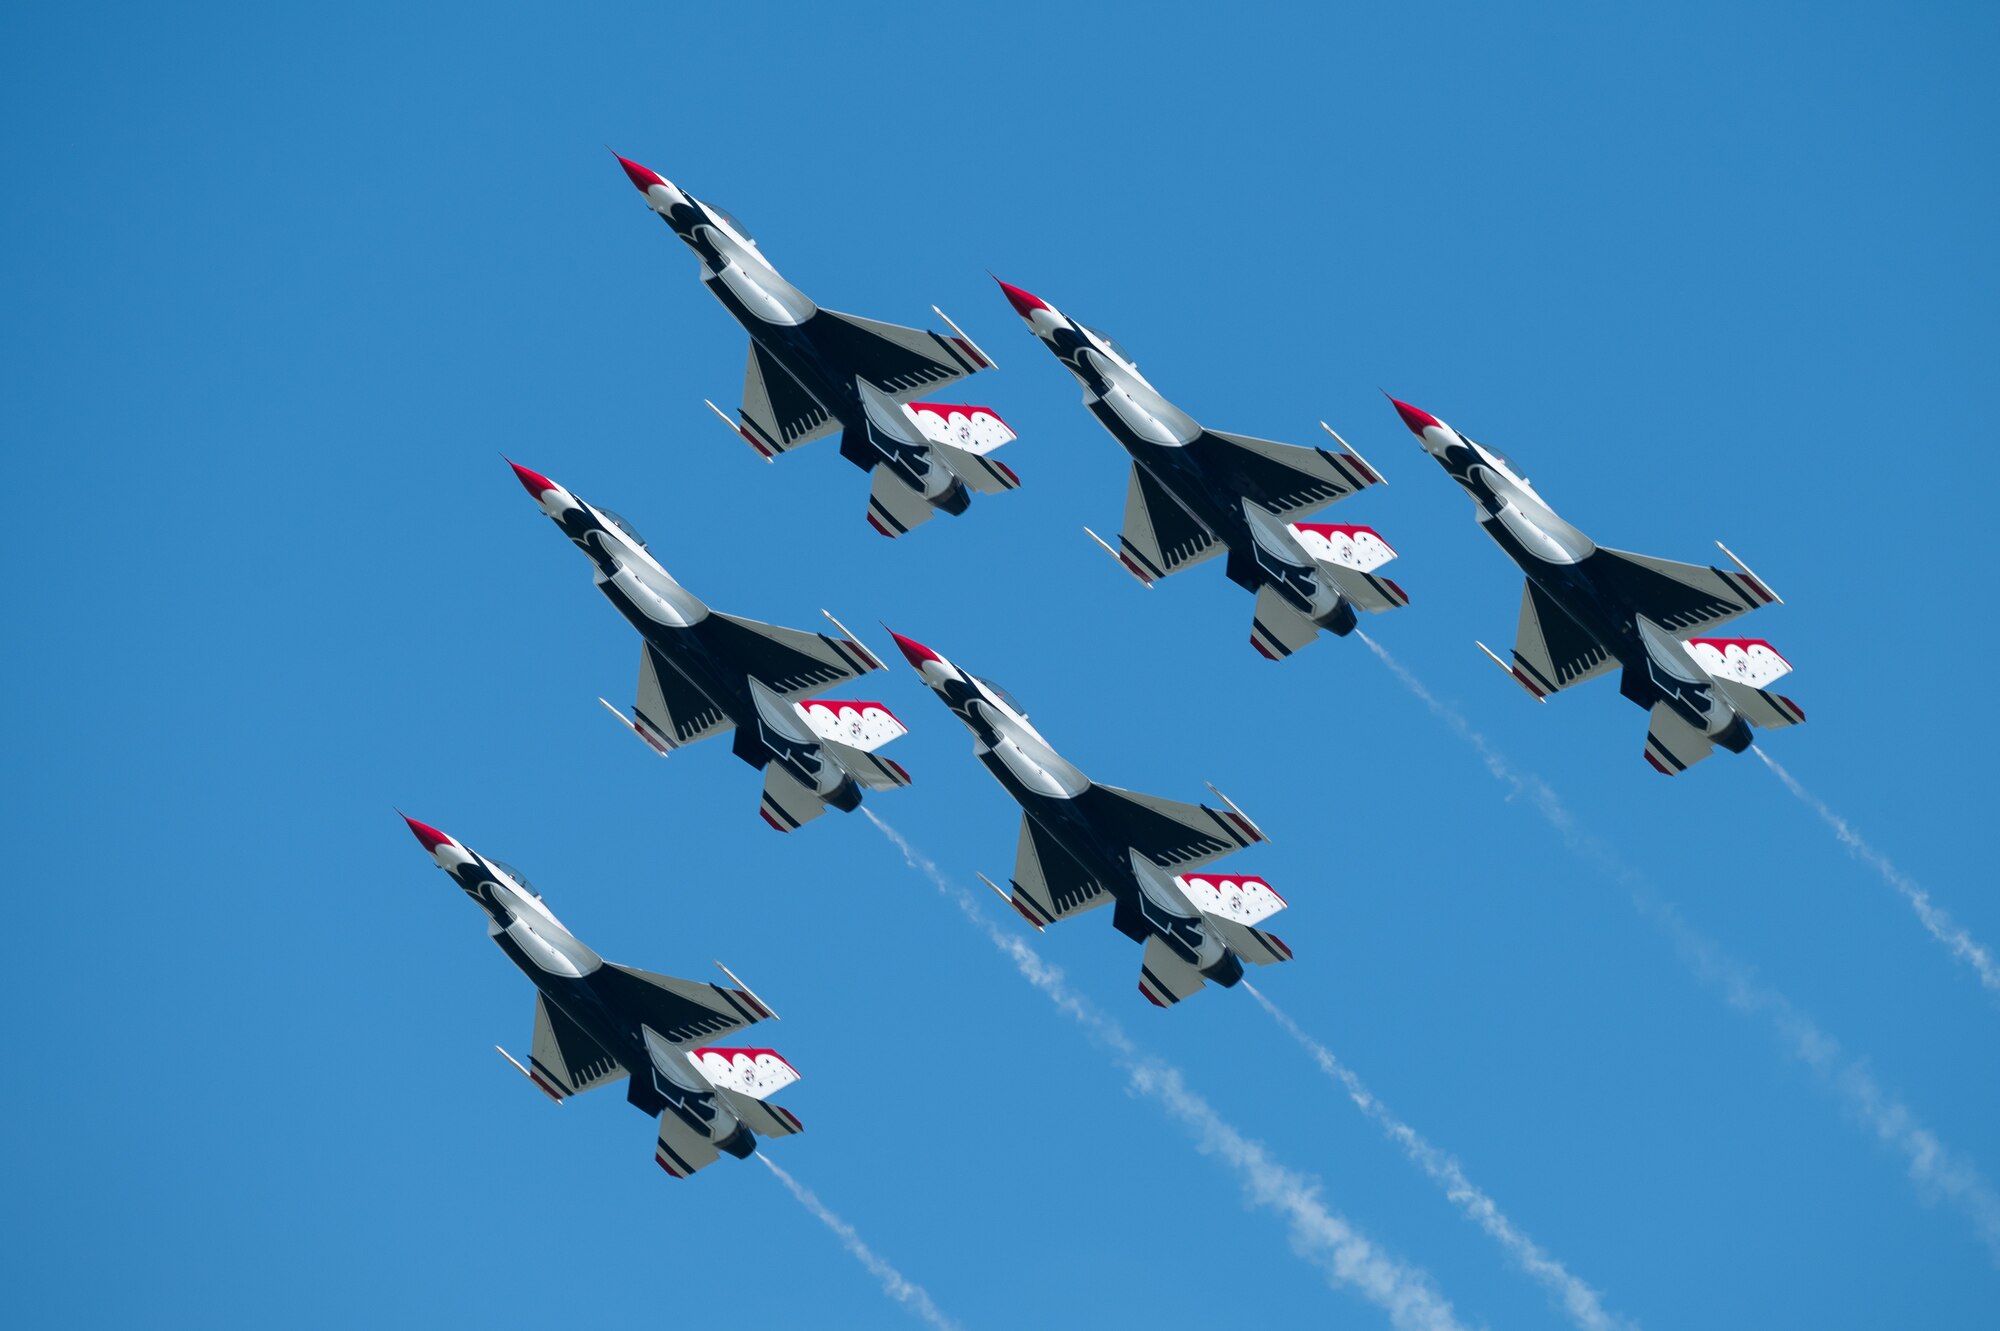 The U.S. Air Force Thunderbirds perform during day two of the 2022 Thunder Over Dover Airshow, May 22, 2022, at Dover Air Force Base, Delaware. The Thunderbirds performed precision flying maneuvers during the 2022 Thunder Over Dover Open House and Airshow May 21-22. (U.S. Air Force photo by Mauricio Campino)